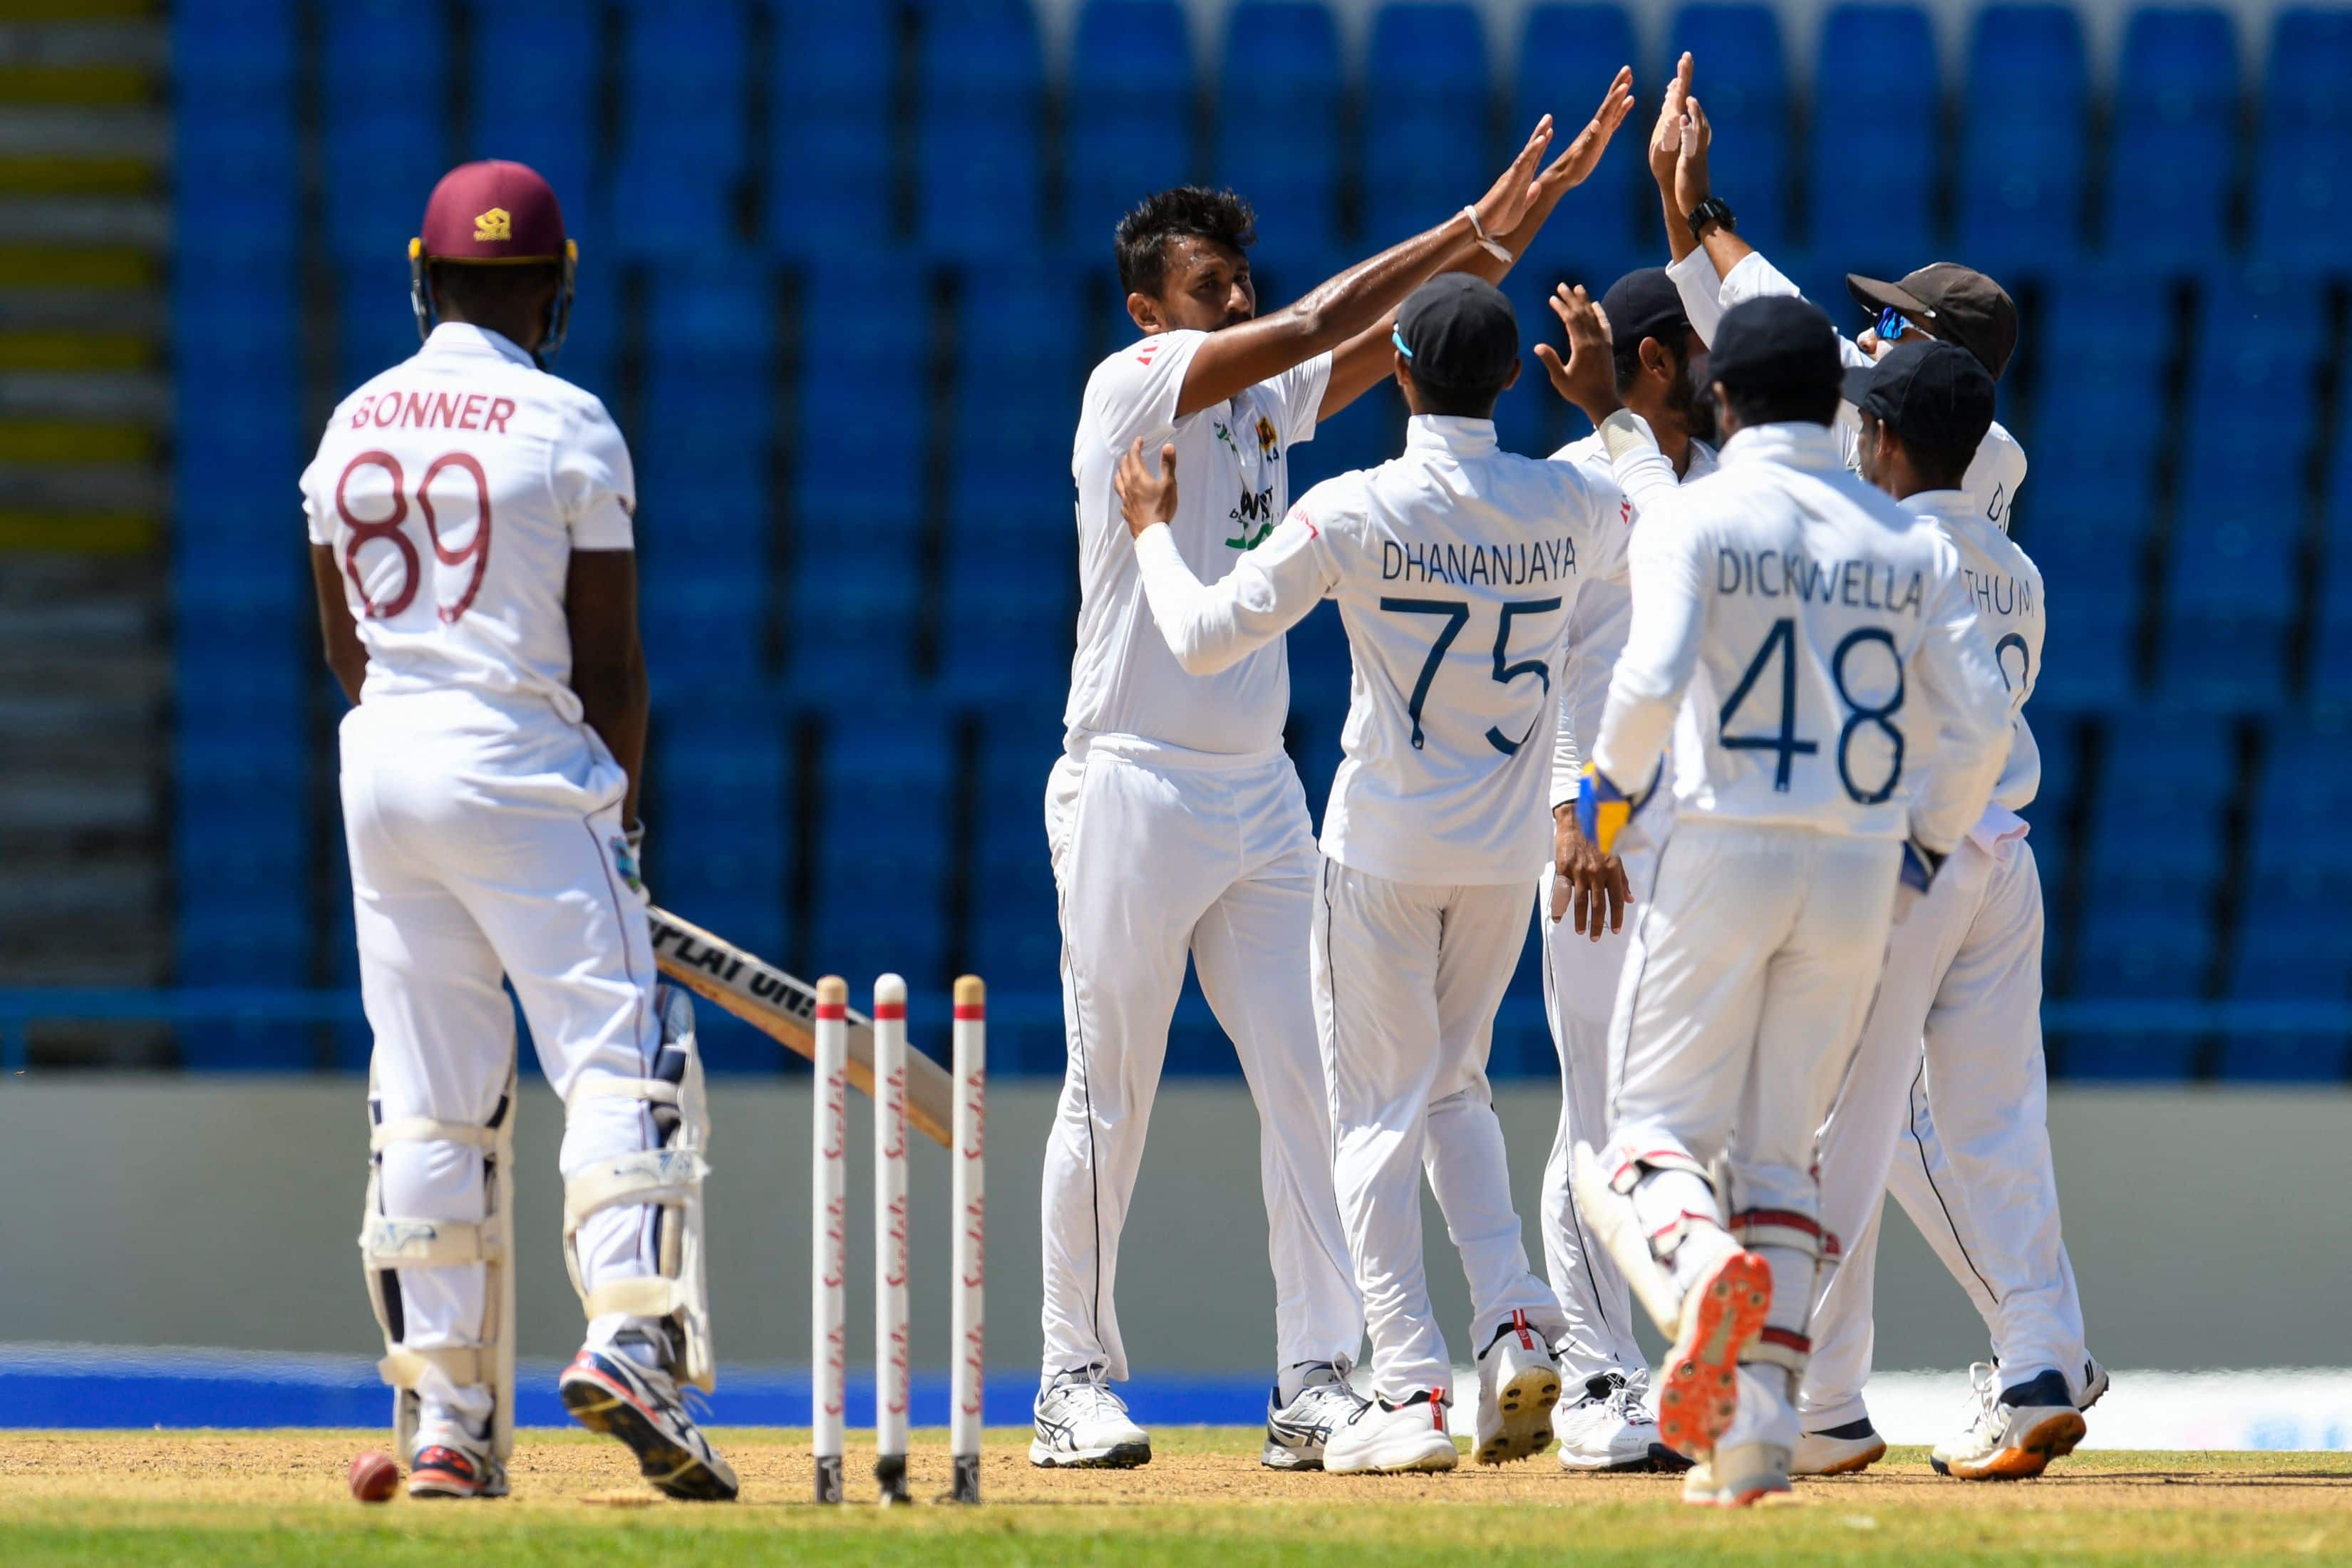 Sri Lanka paceman Suranga Lakmal celebrates after picking up a wicket on Day 1 of the 2nd Test against West Indies. (Source: Twitter)